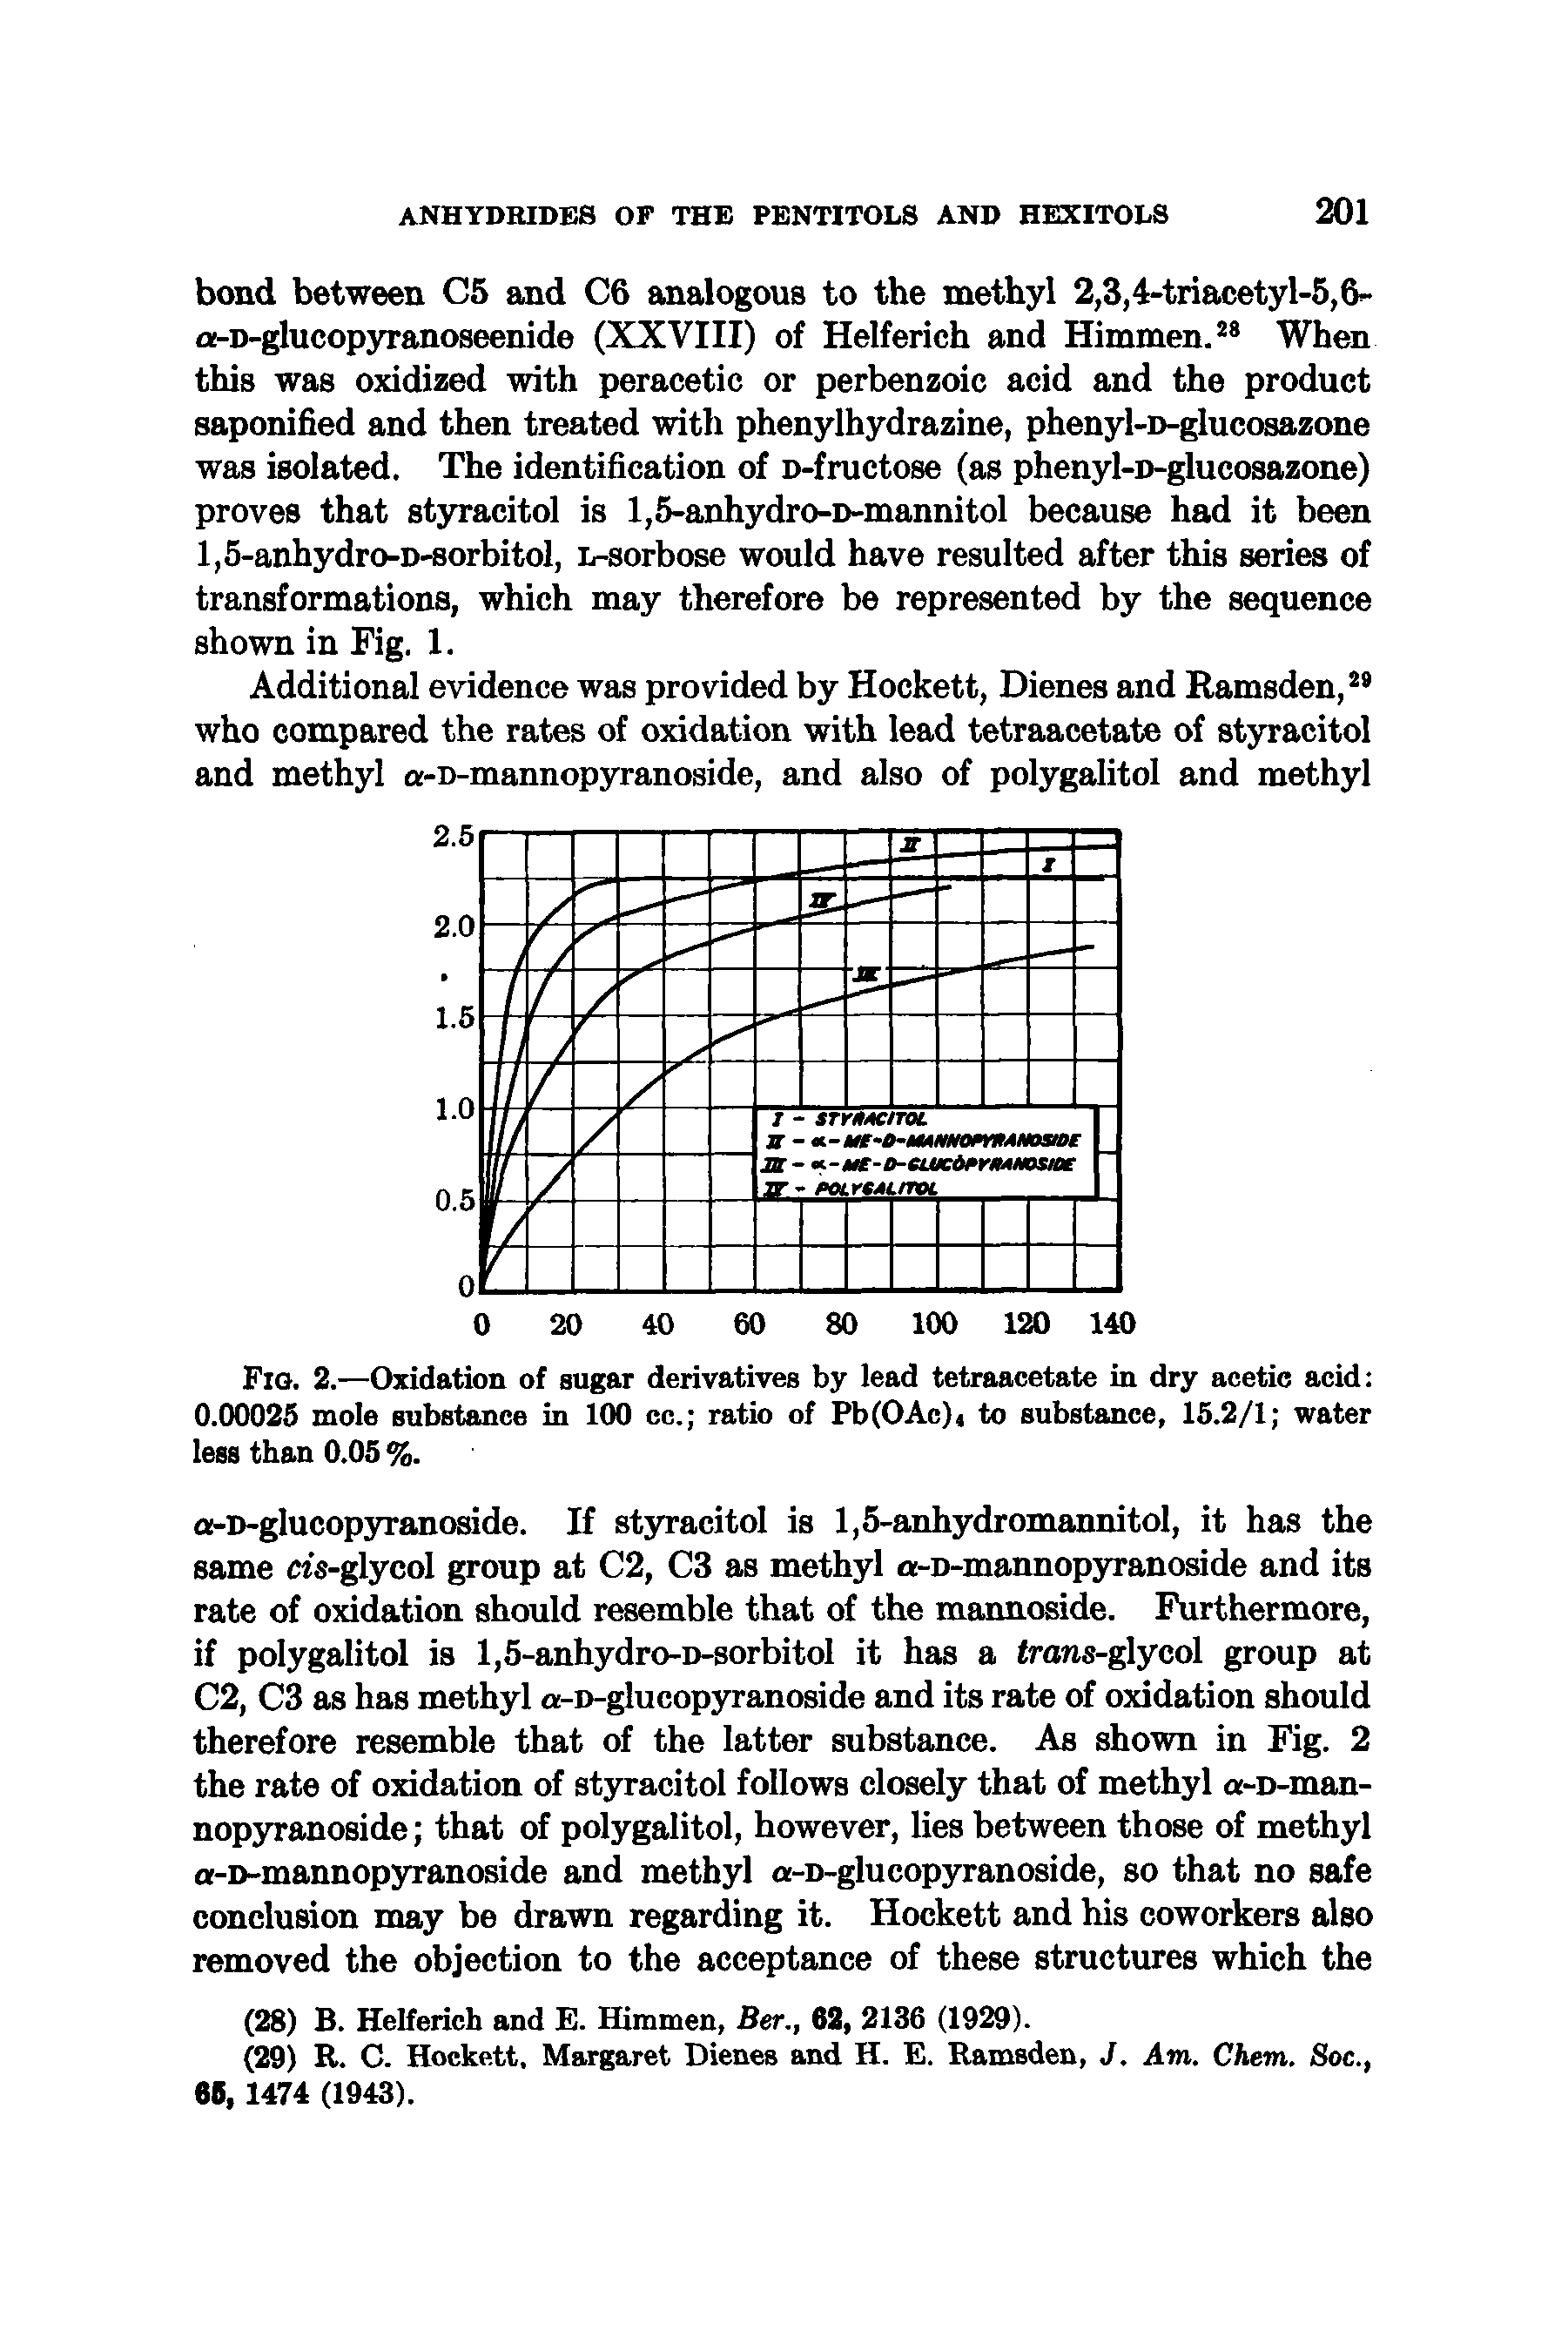 Fig. 2.—Oxidation of sugar derivatives by lead tetraacetate in dry acetic acid 0.00025 mole substance in 100 cc. ratio of Pb(OAc)4 to substance, 15.2/1 water less than 0.05 %.